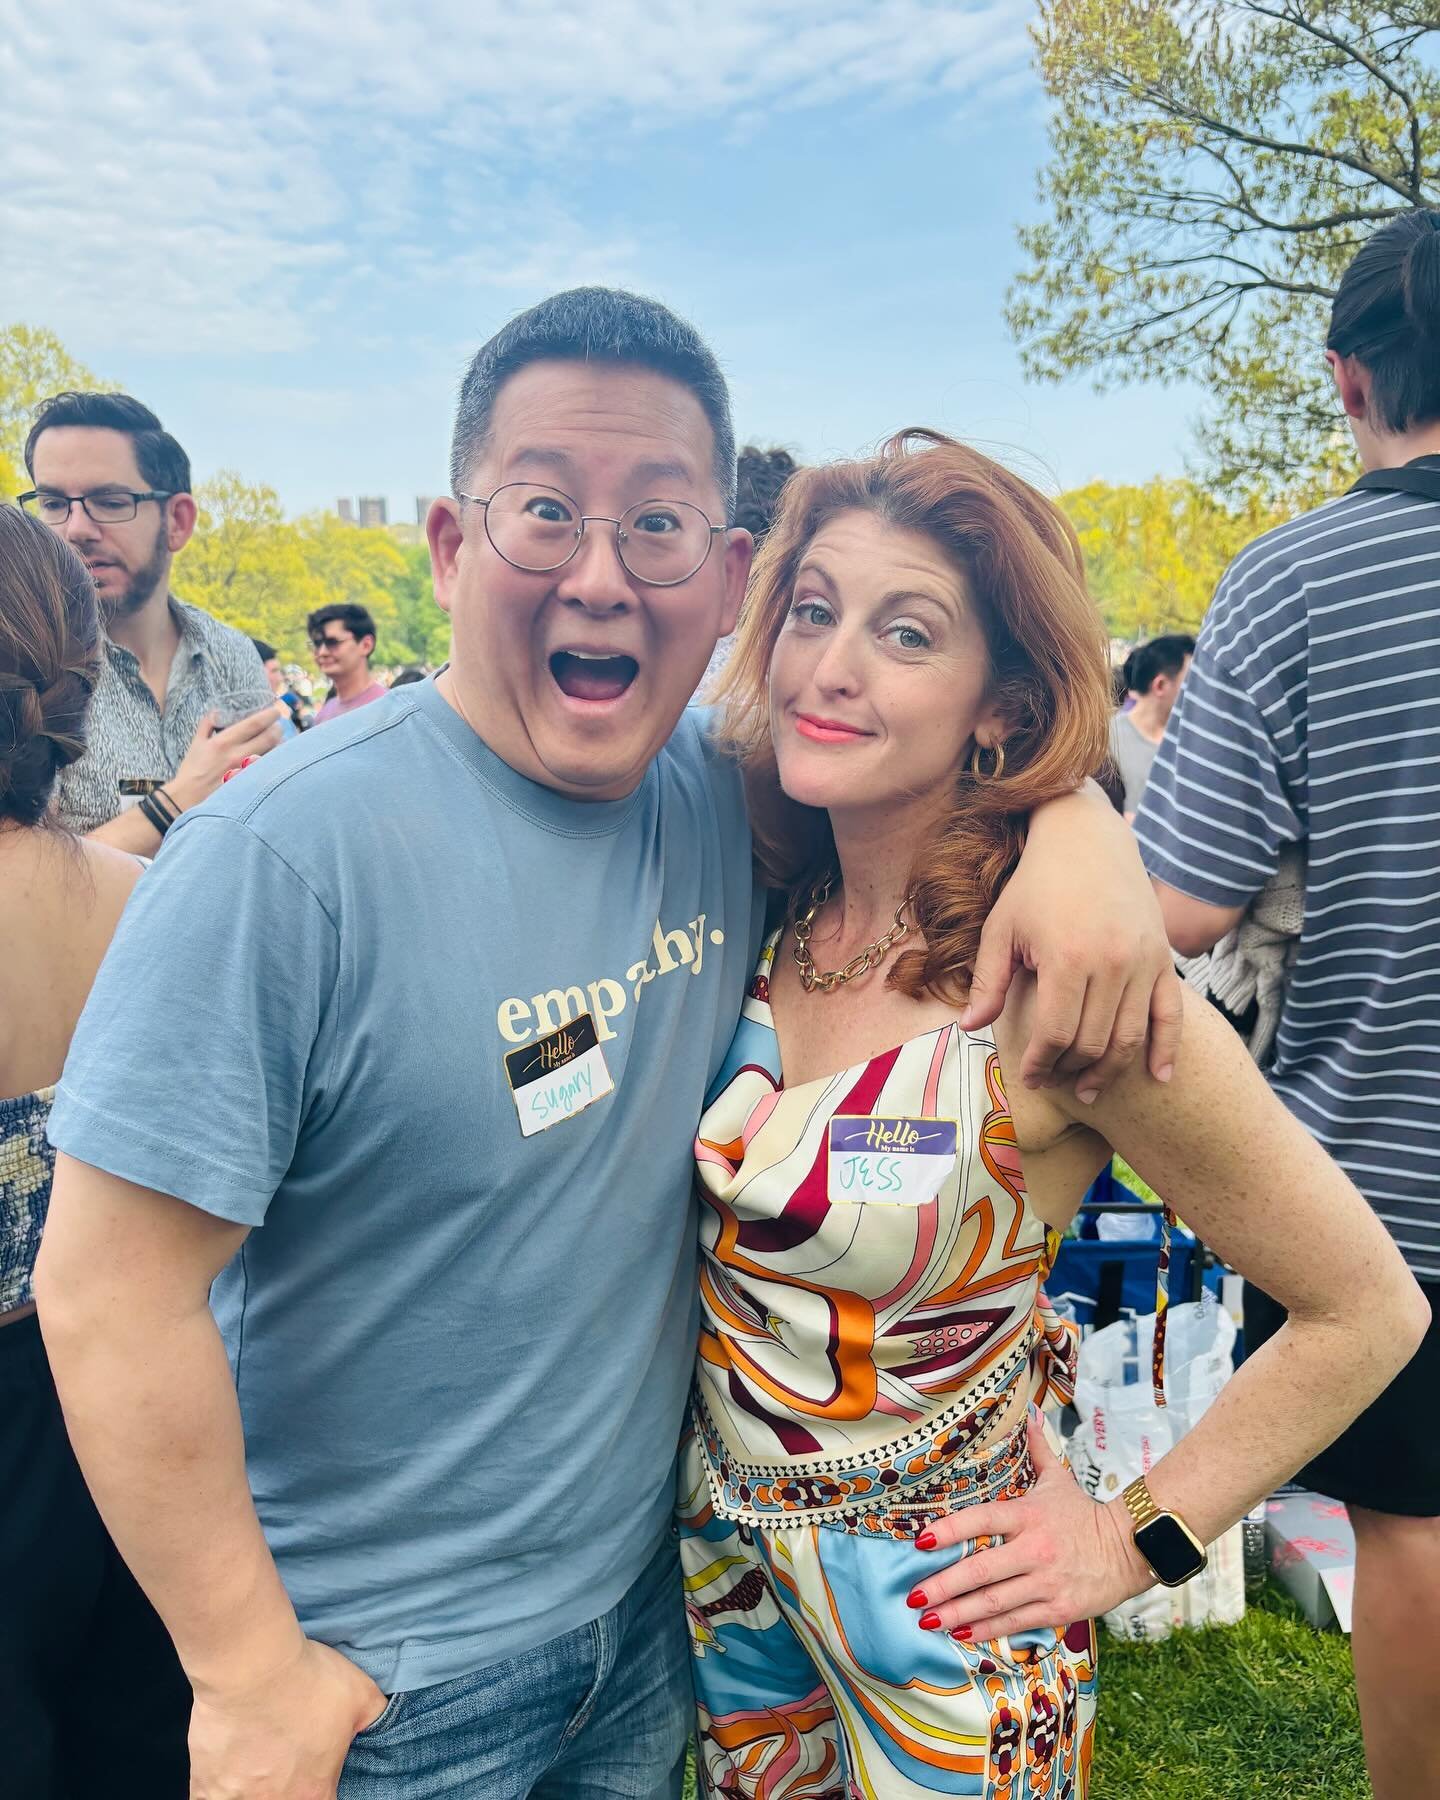 The Great Spring Picnic was Perfection! Gorgeous weather &amp; great friends ❤️ thank you @thesugaryman @richieyeee @hellofriendsnyc